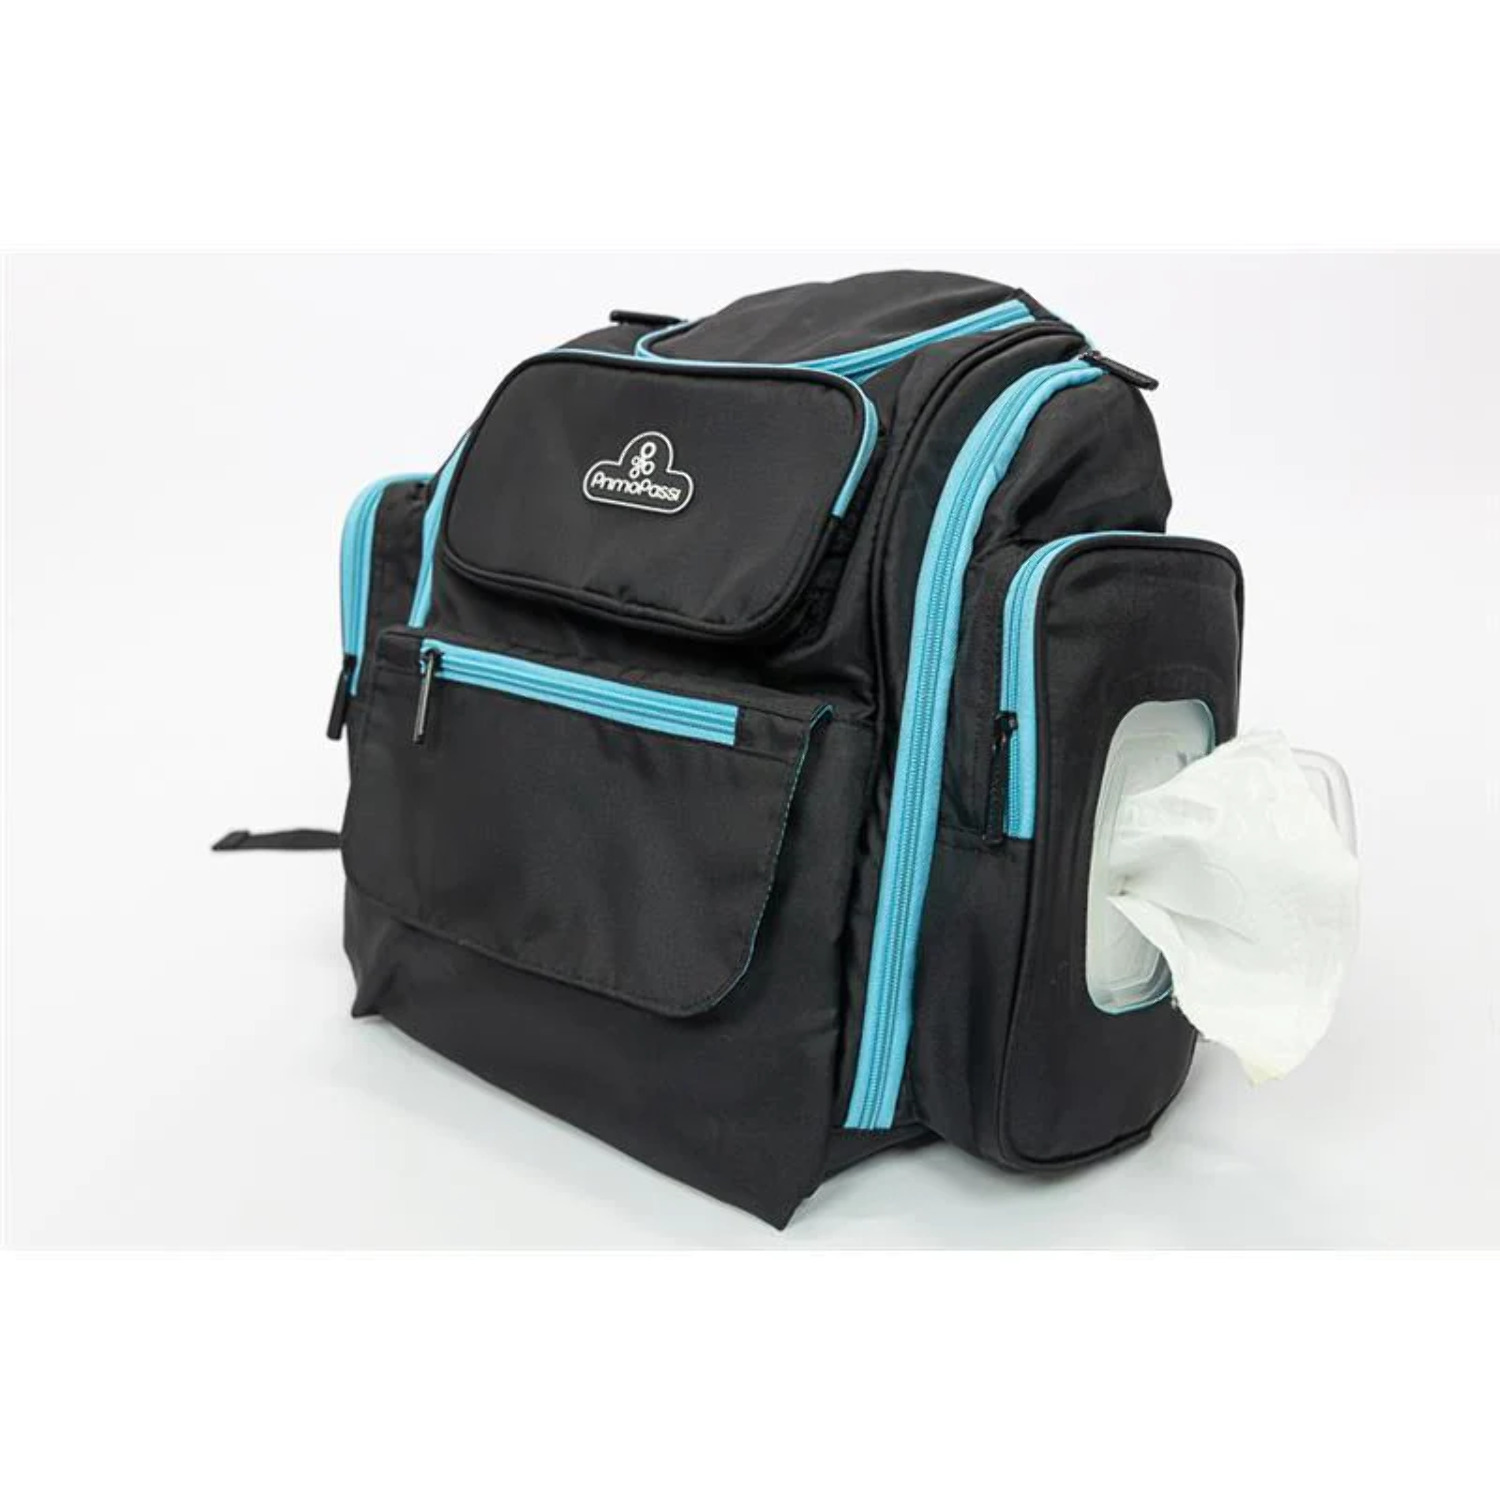 Primo Passi - Blue Backpack Diaper Bag - image 5 of 9